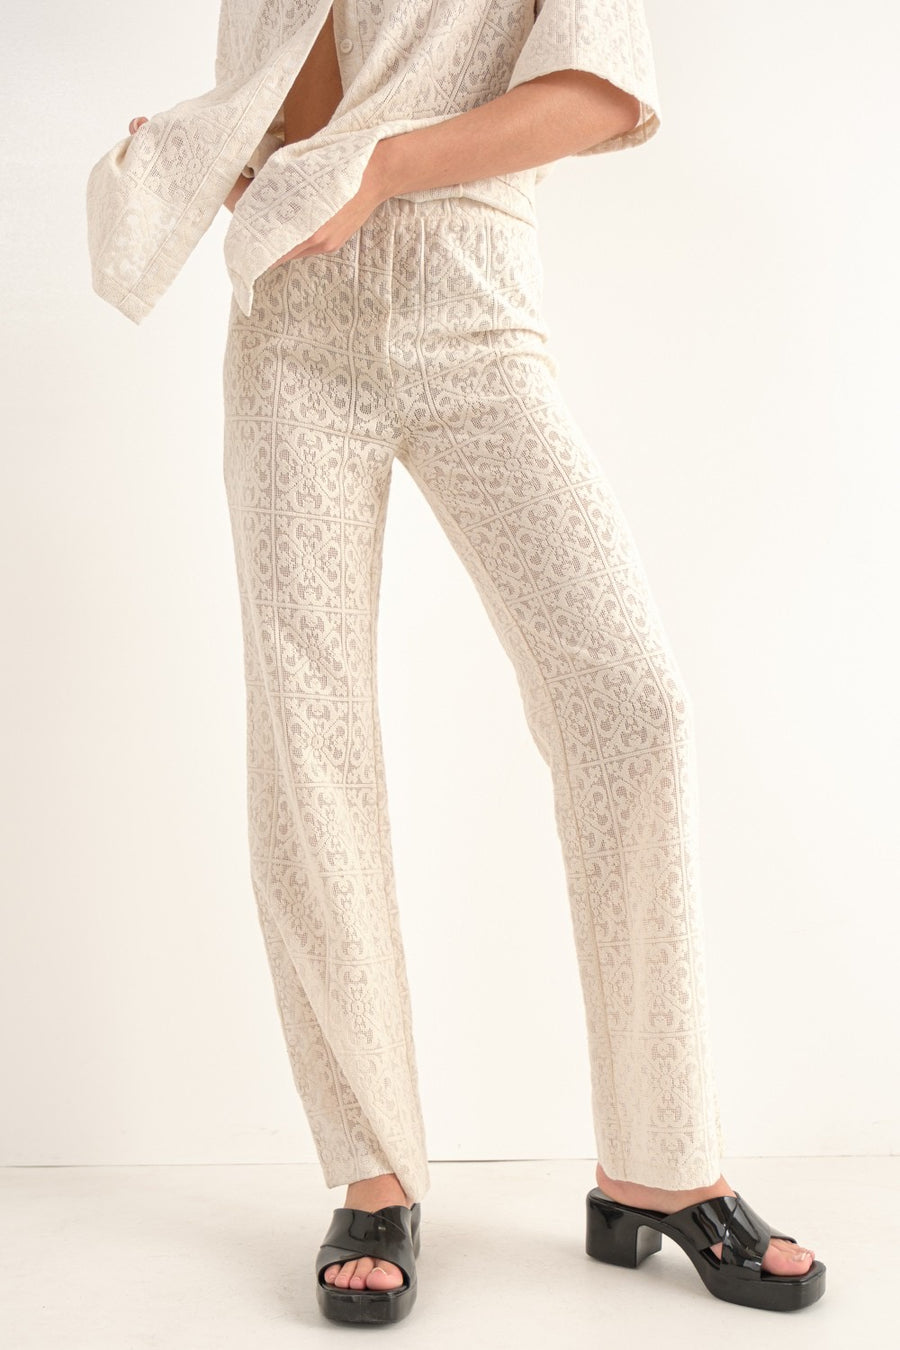 Crochet lace pants in the color cream.